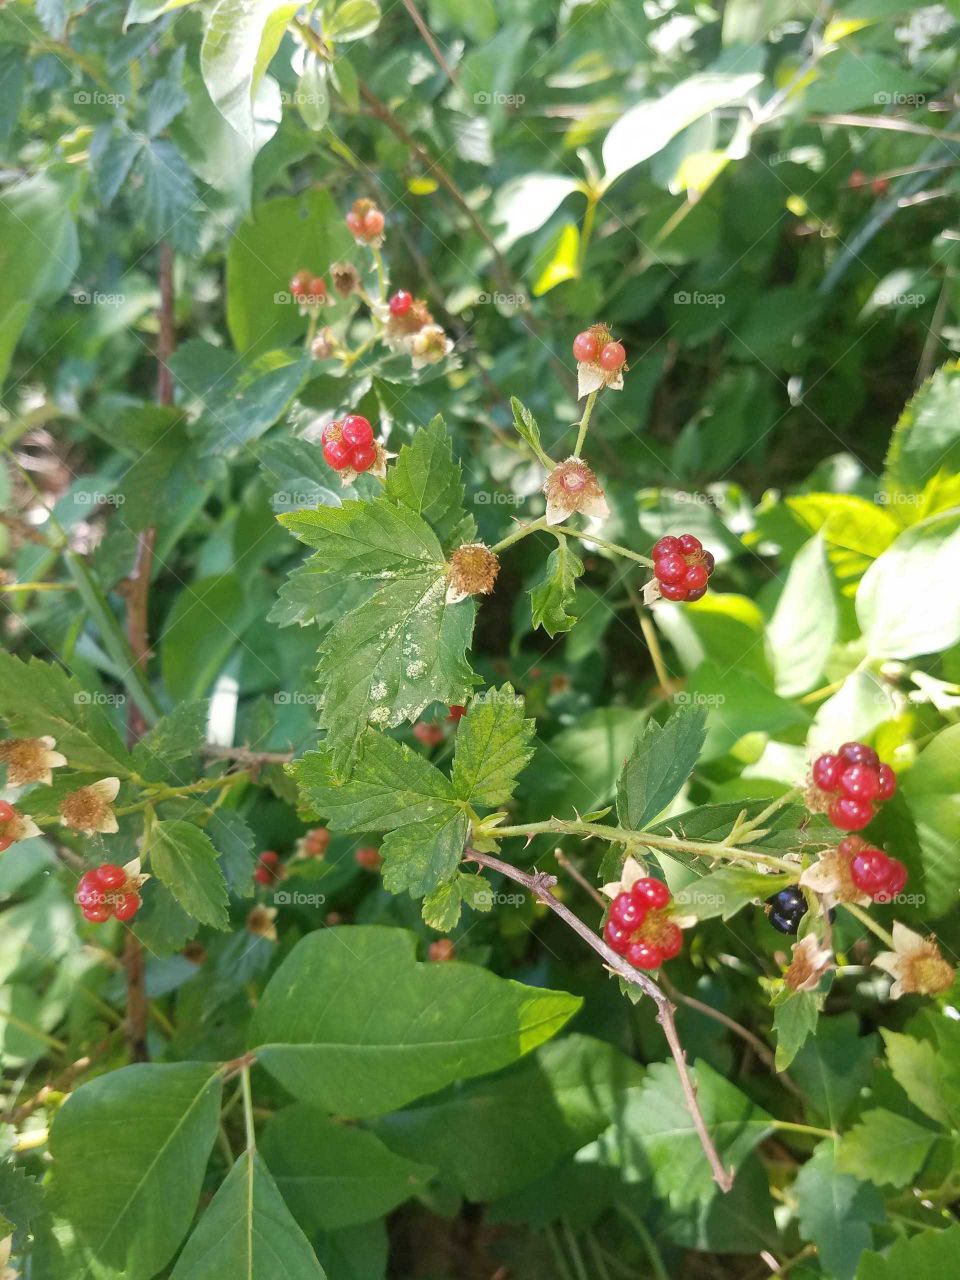 wild berries growing amidst the poison ivy in the pasture